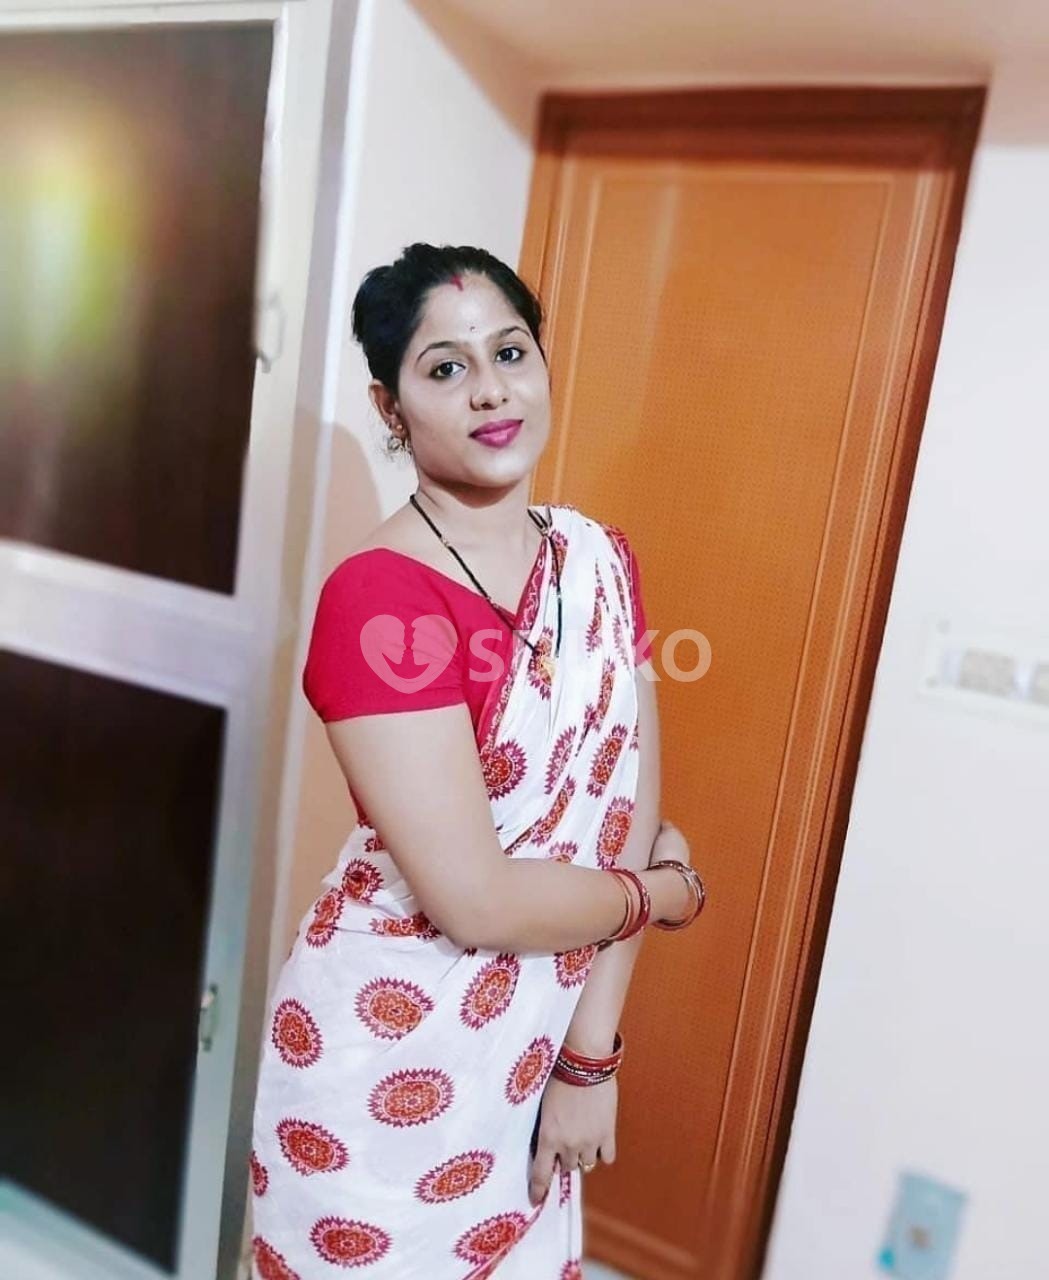 HYDERABAD🔸 █▬█⓿▀█▀ 𝐆𝐈𝐑𝐋 𝐇𝐎𝐓 𝐀𝐍𝐃 𝐒𝐄XY GIRLS AND HOUSEWIFE AVAILABL